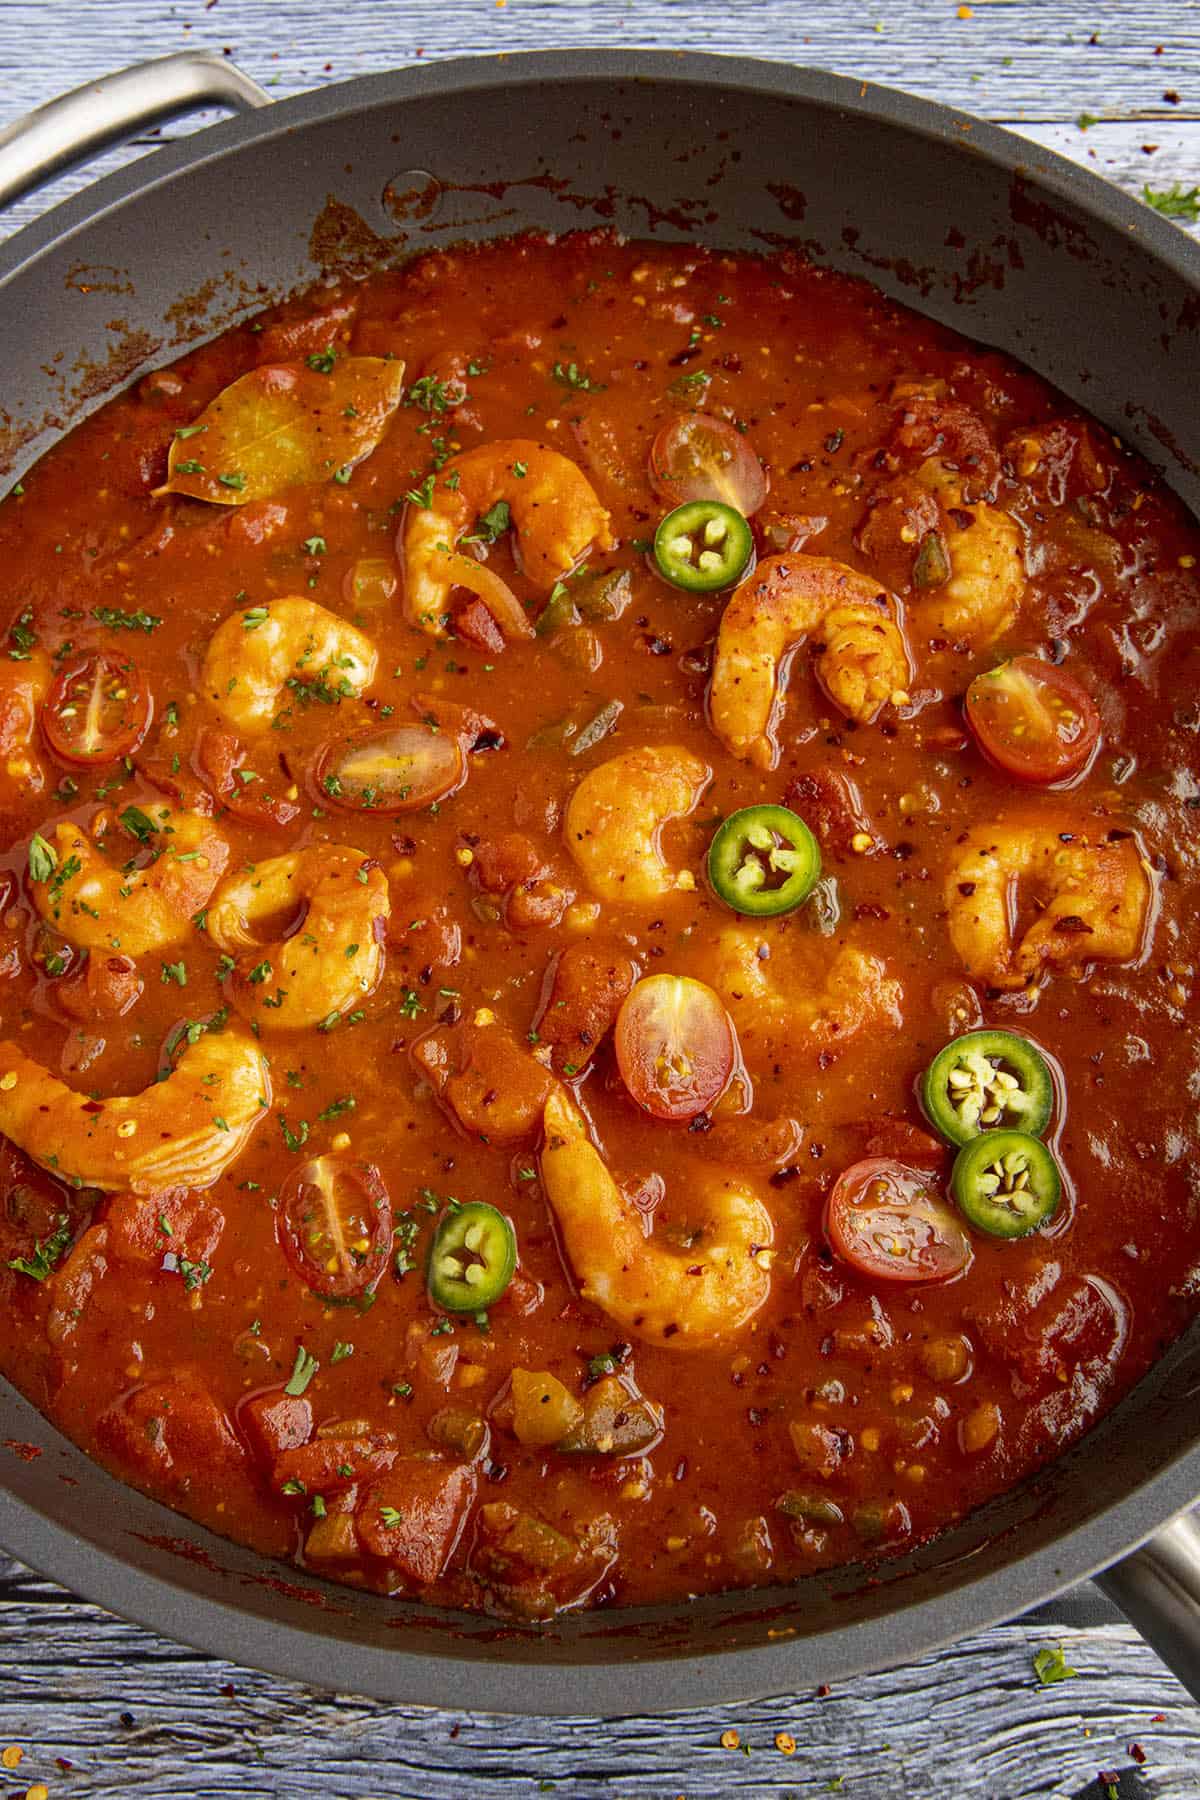 Shrimp Creole in a pan, garnished with peppers and chili flakes.